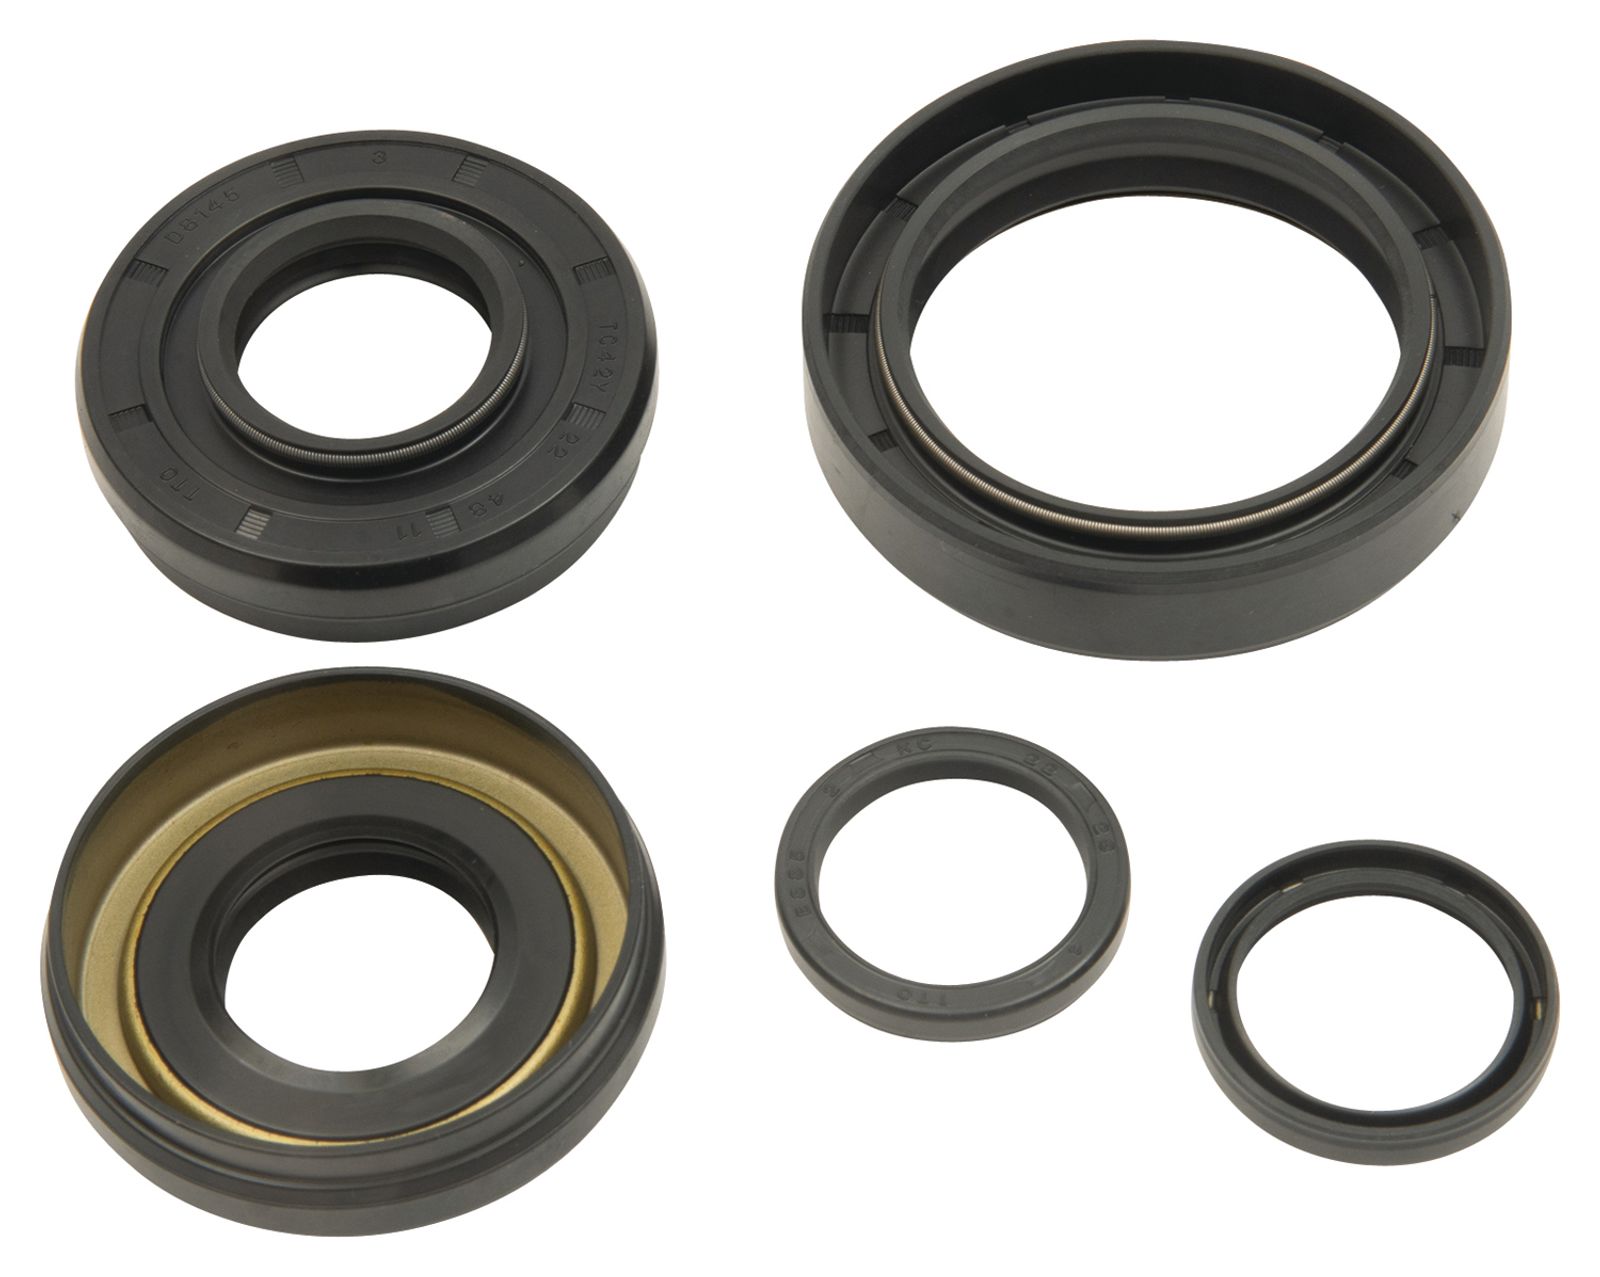 Wrp Diff Seal Kits - WRP252100-5 image